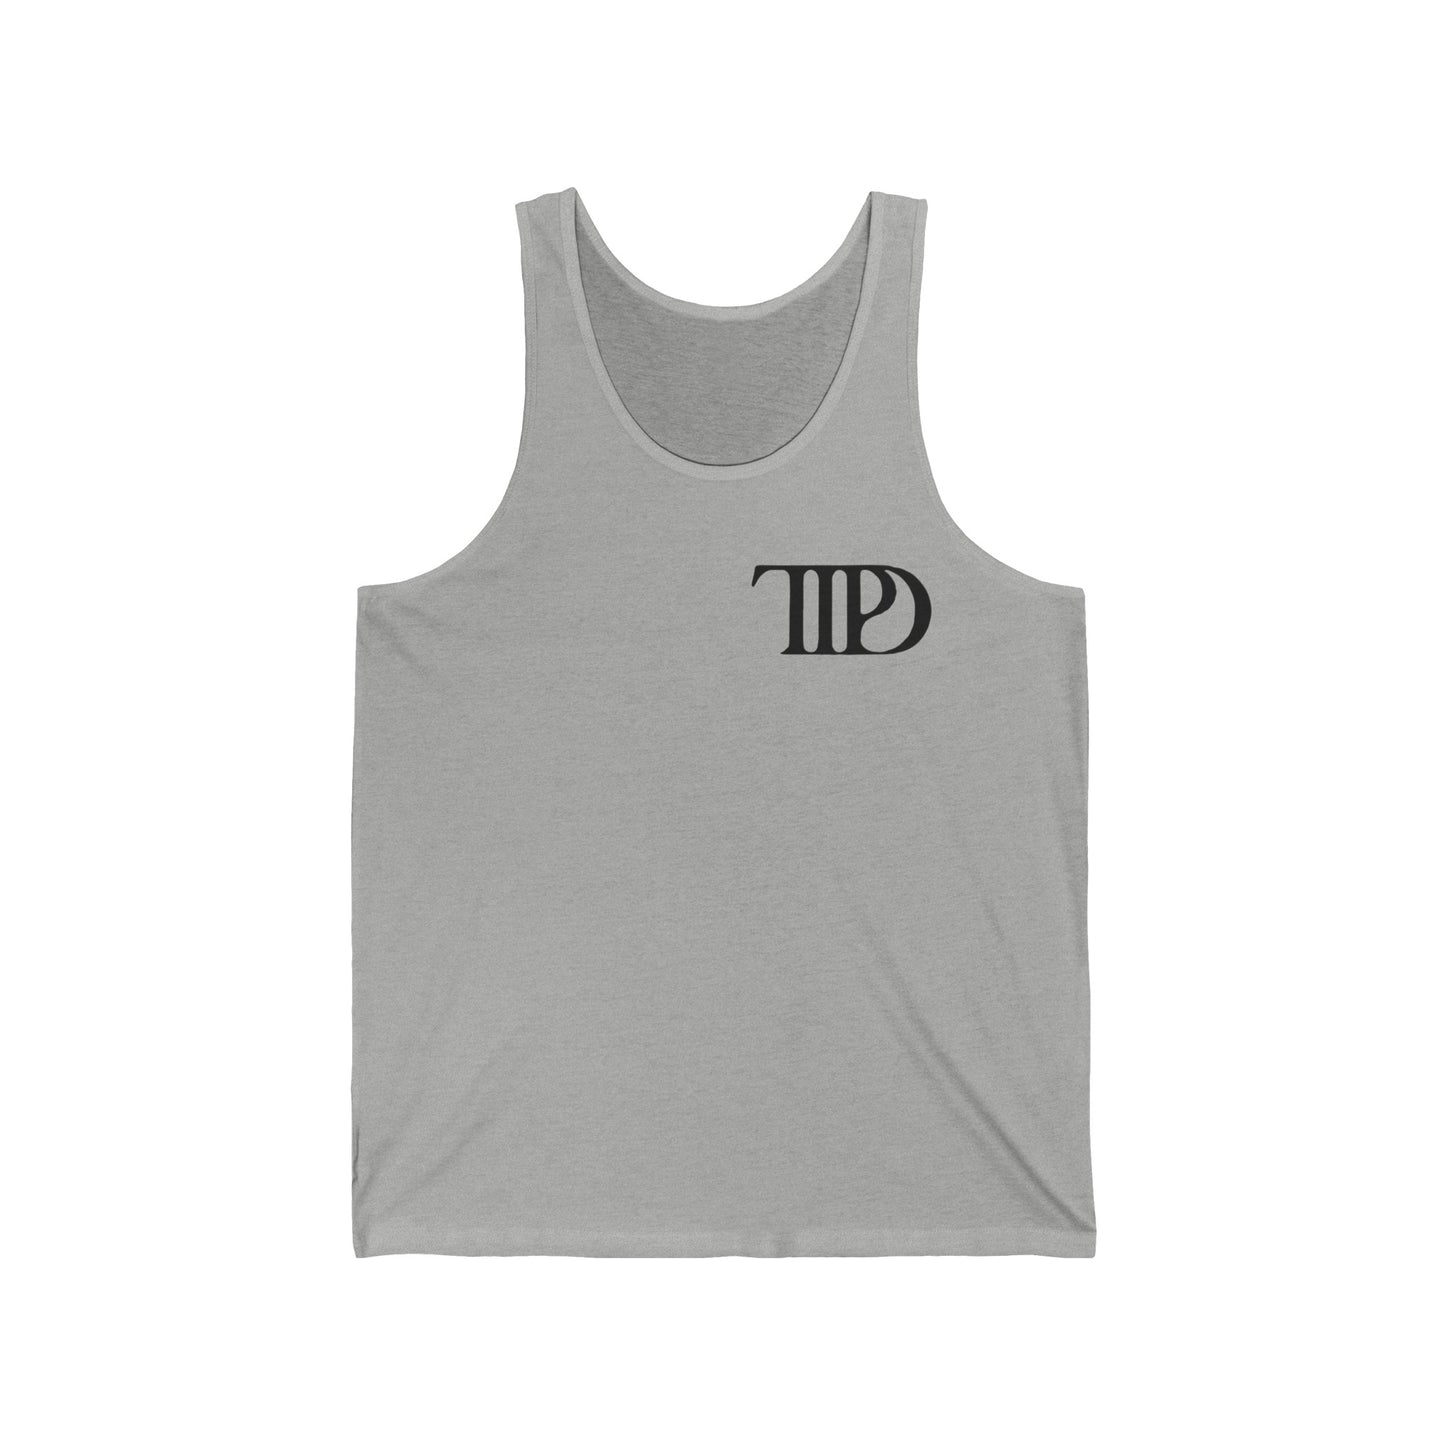 TTPD, Sincerely the Chairman Tank Top